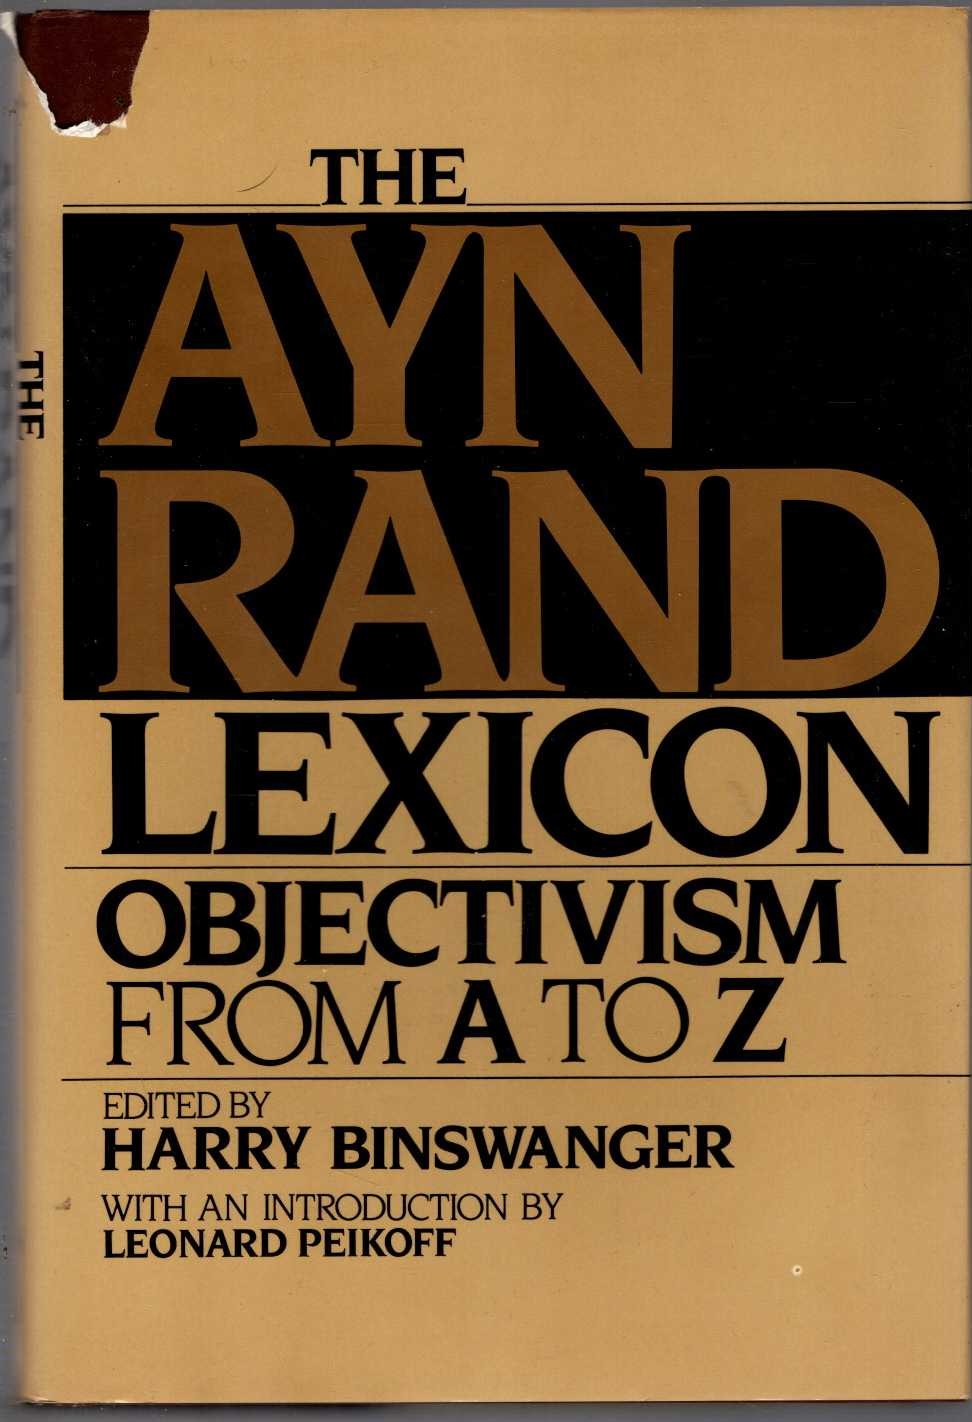 THE AYN RAND LEXICON FROM A TO Z front book cover image